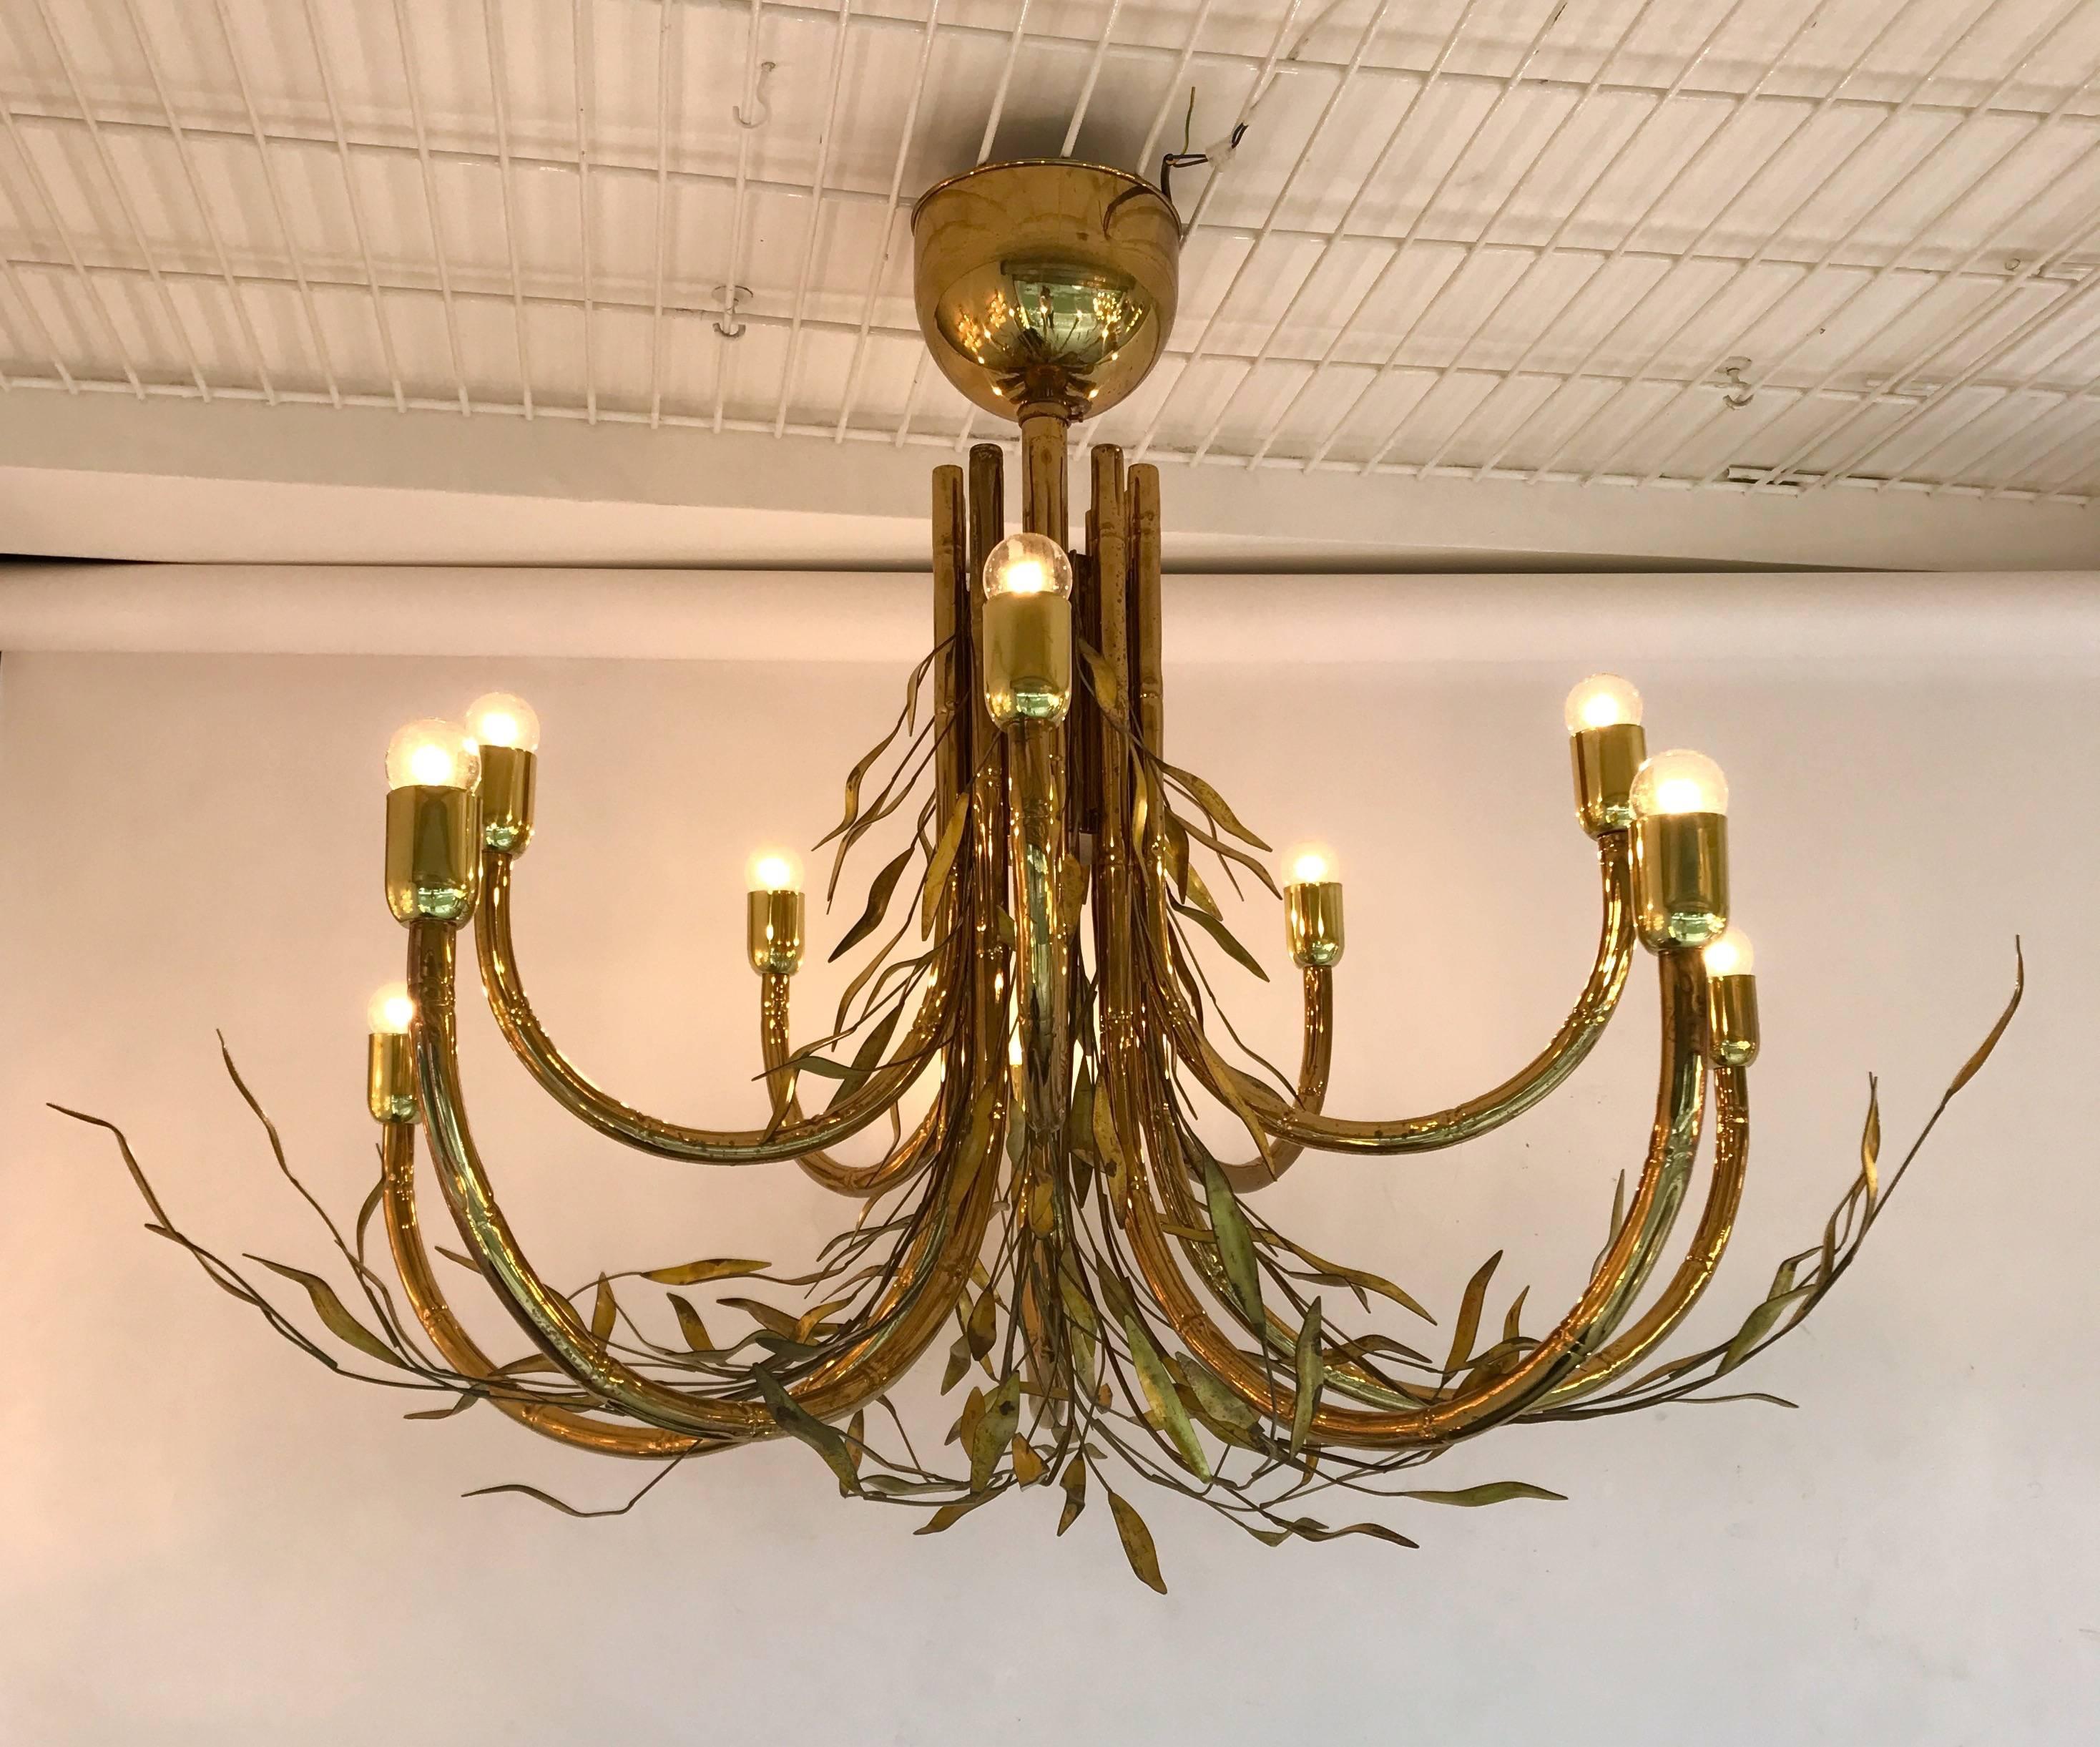 Huge chandelier or ceiling pendant light bamboo style full brass, delicious lacquered leaves imitation of real leaves. Ten lights. Large size, great quality and patina. Famous design like Maison Jansen, Baguès, Palm tree, Hollywood Regency, Romeo